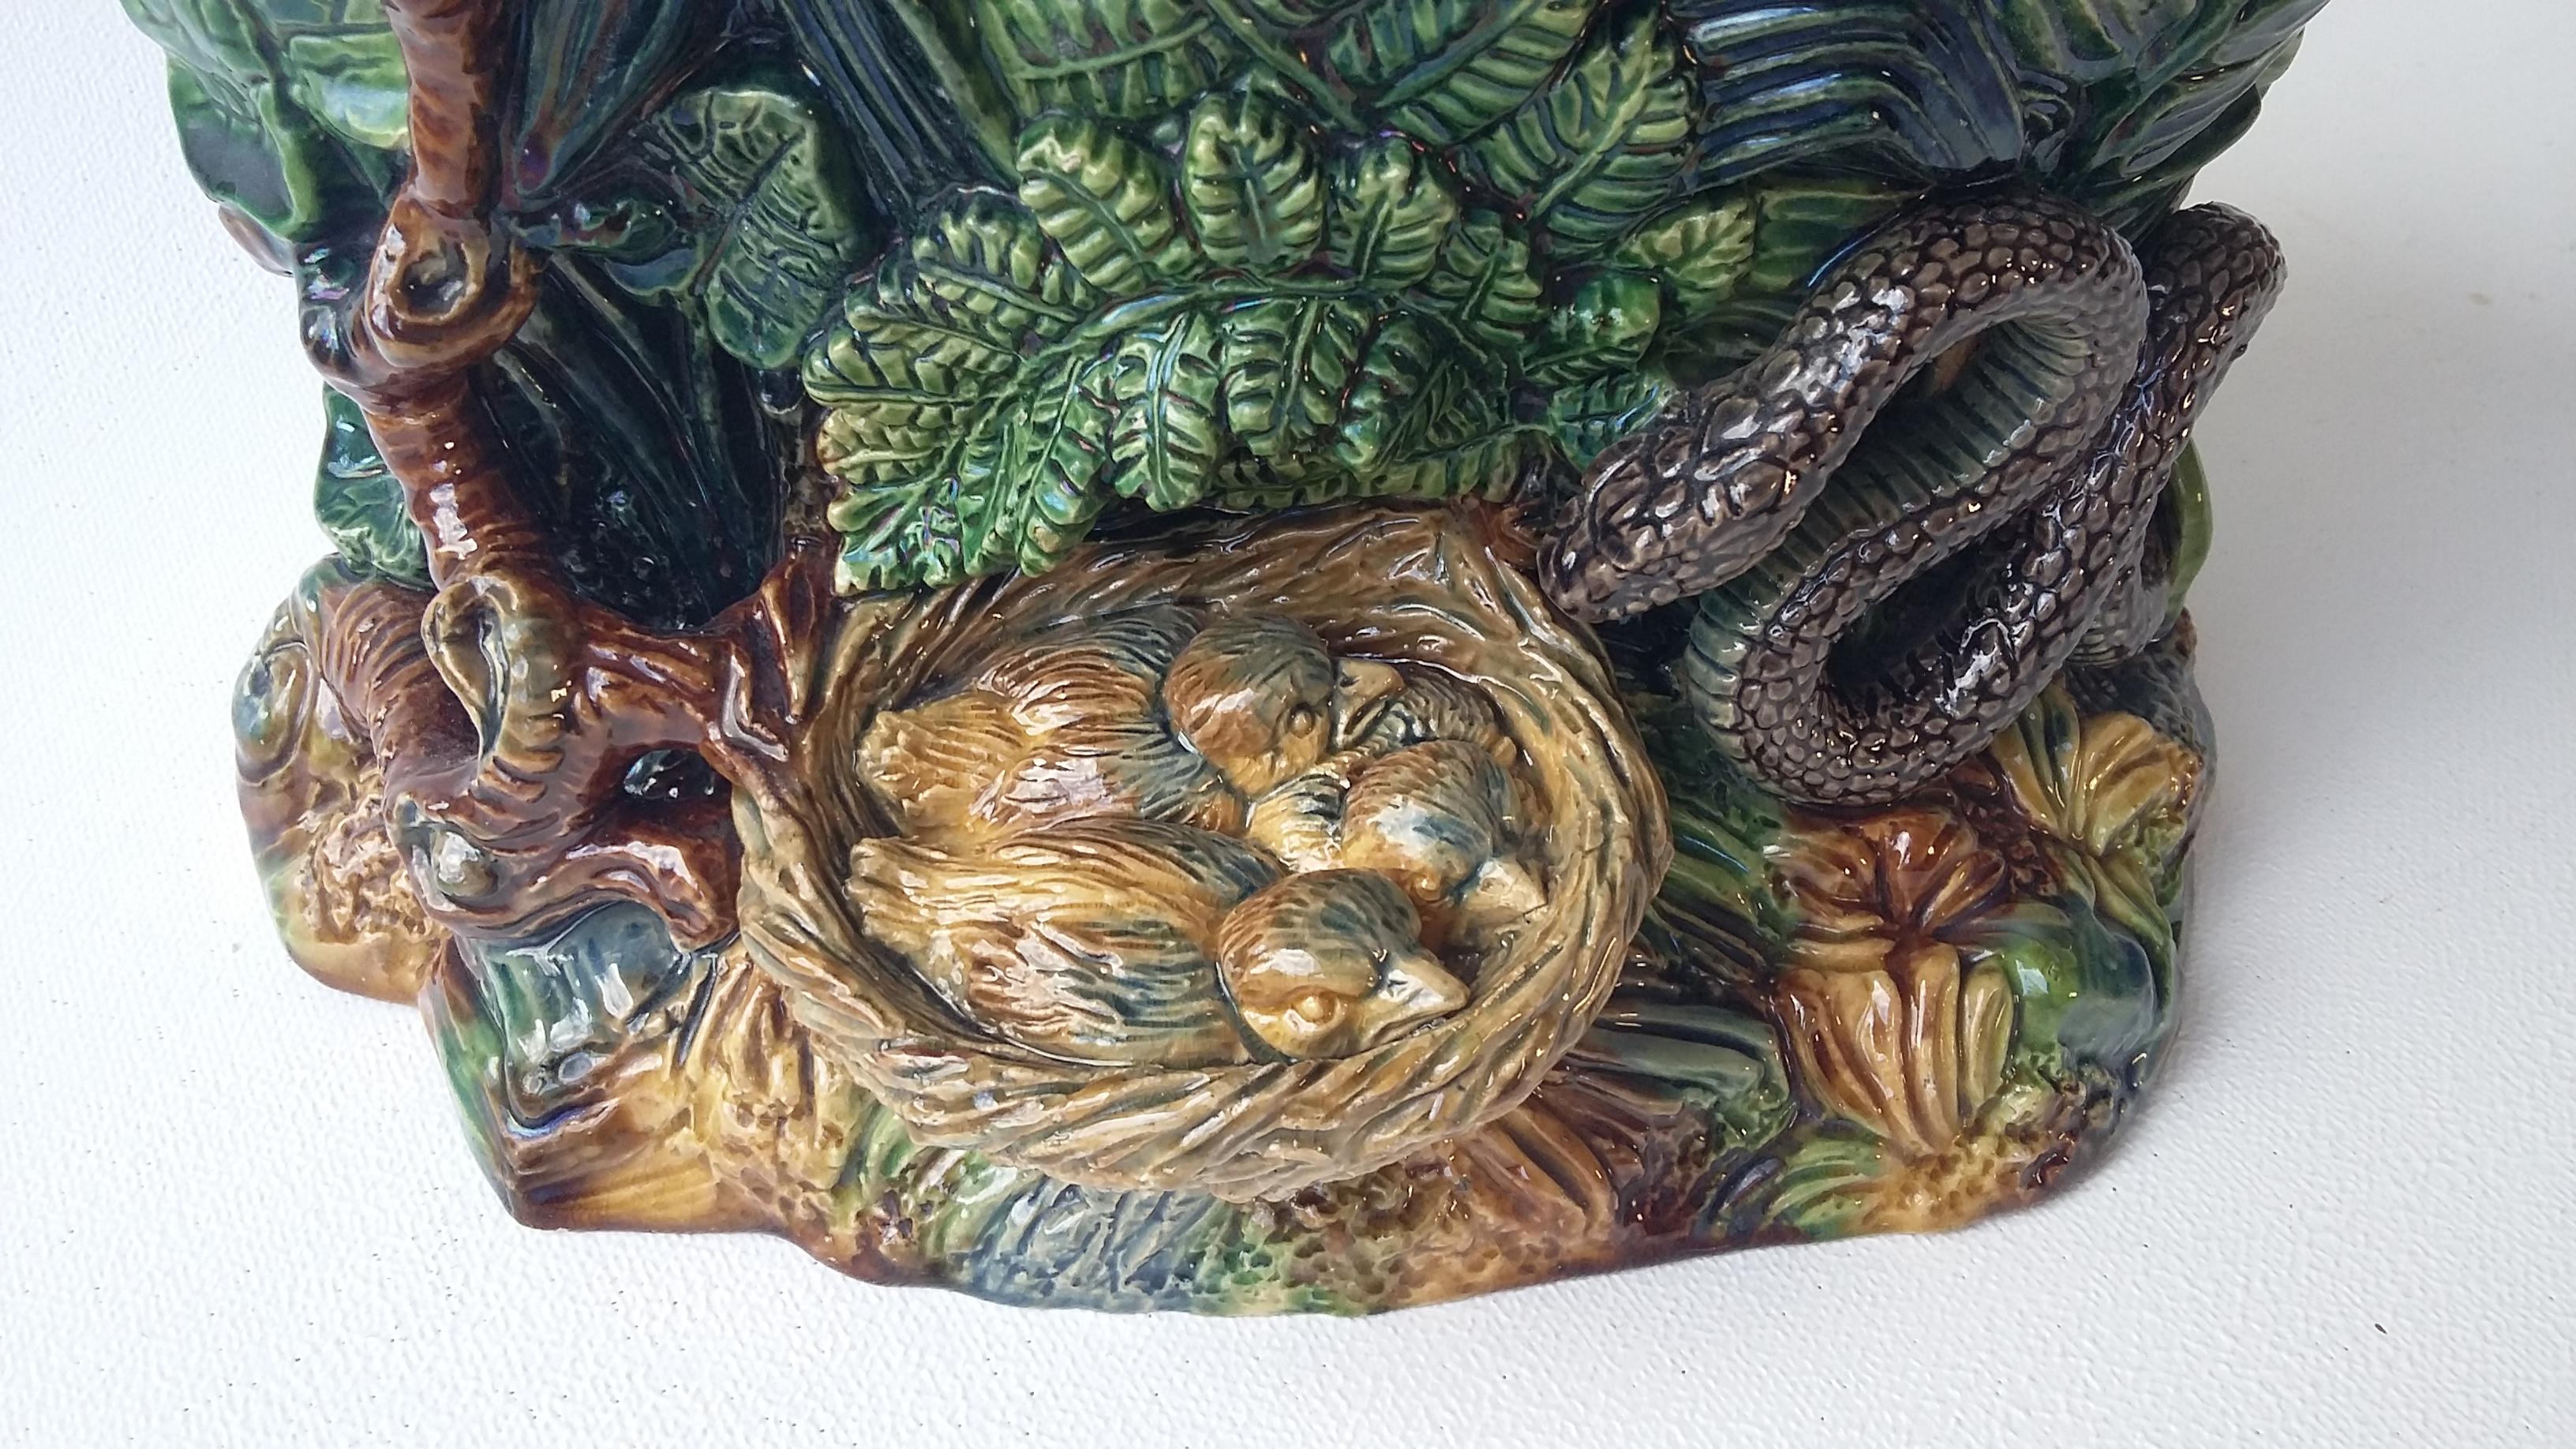 A naturalist Majolica jardinière with different kind of leaves, large ferns leaves, a branch on the front and a nest with birds threatened by a snake signed Johann Maresch (1821-1914 Austria).